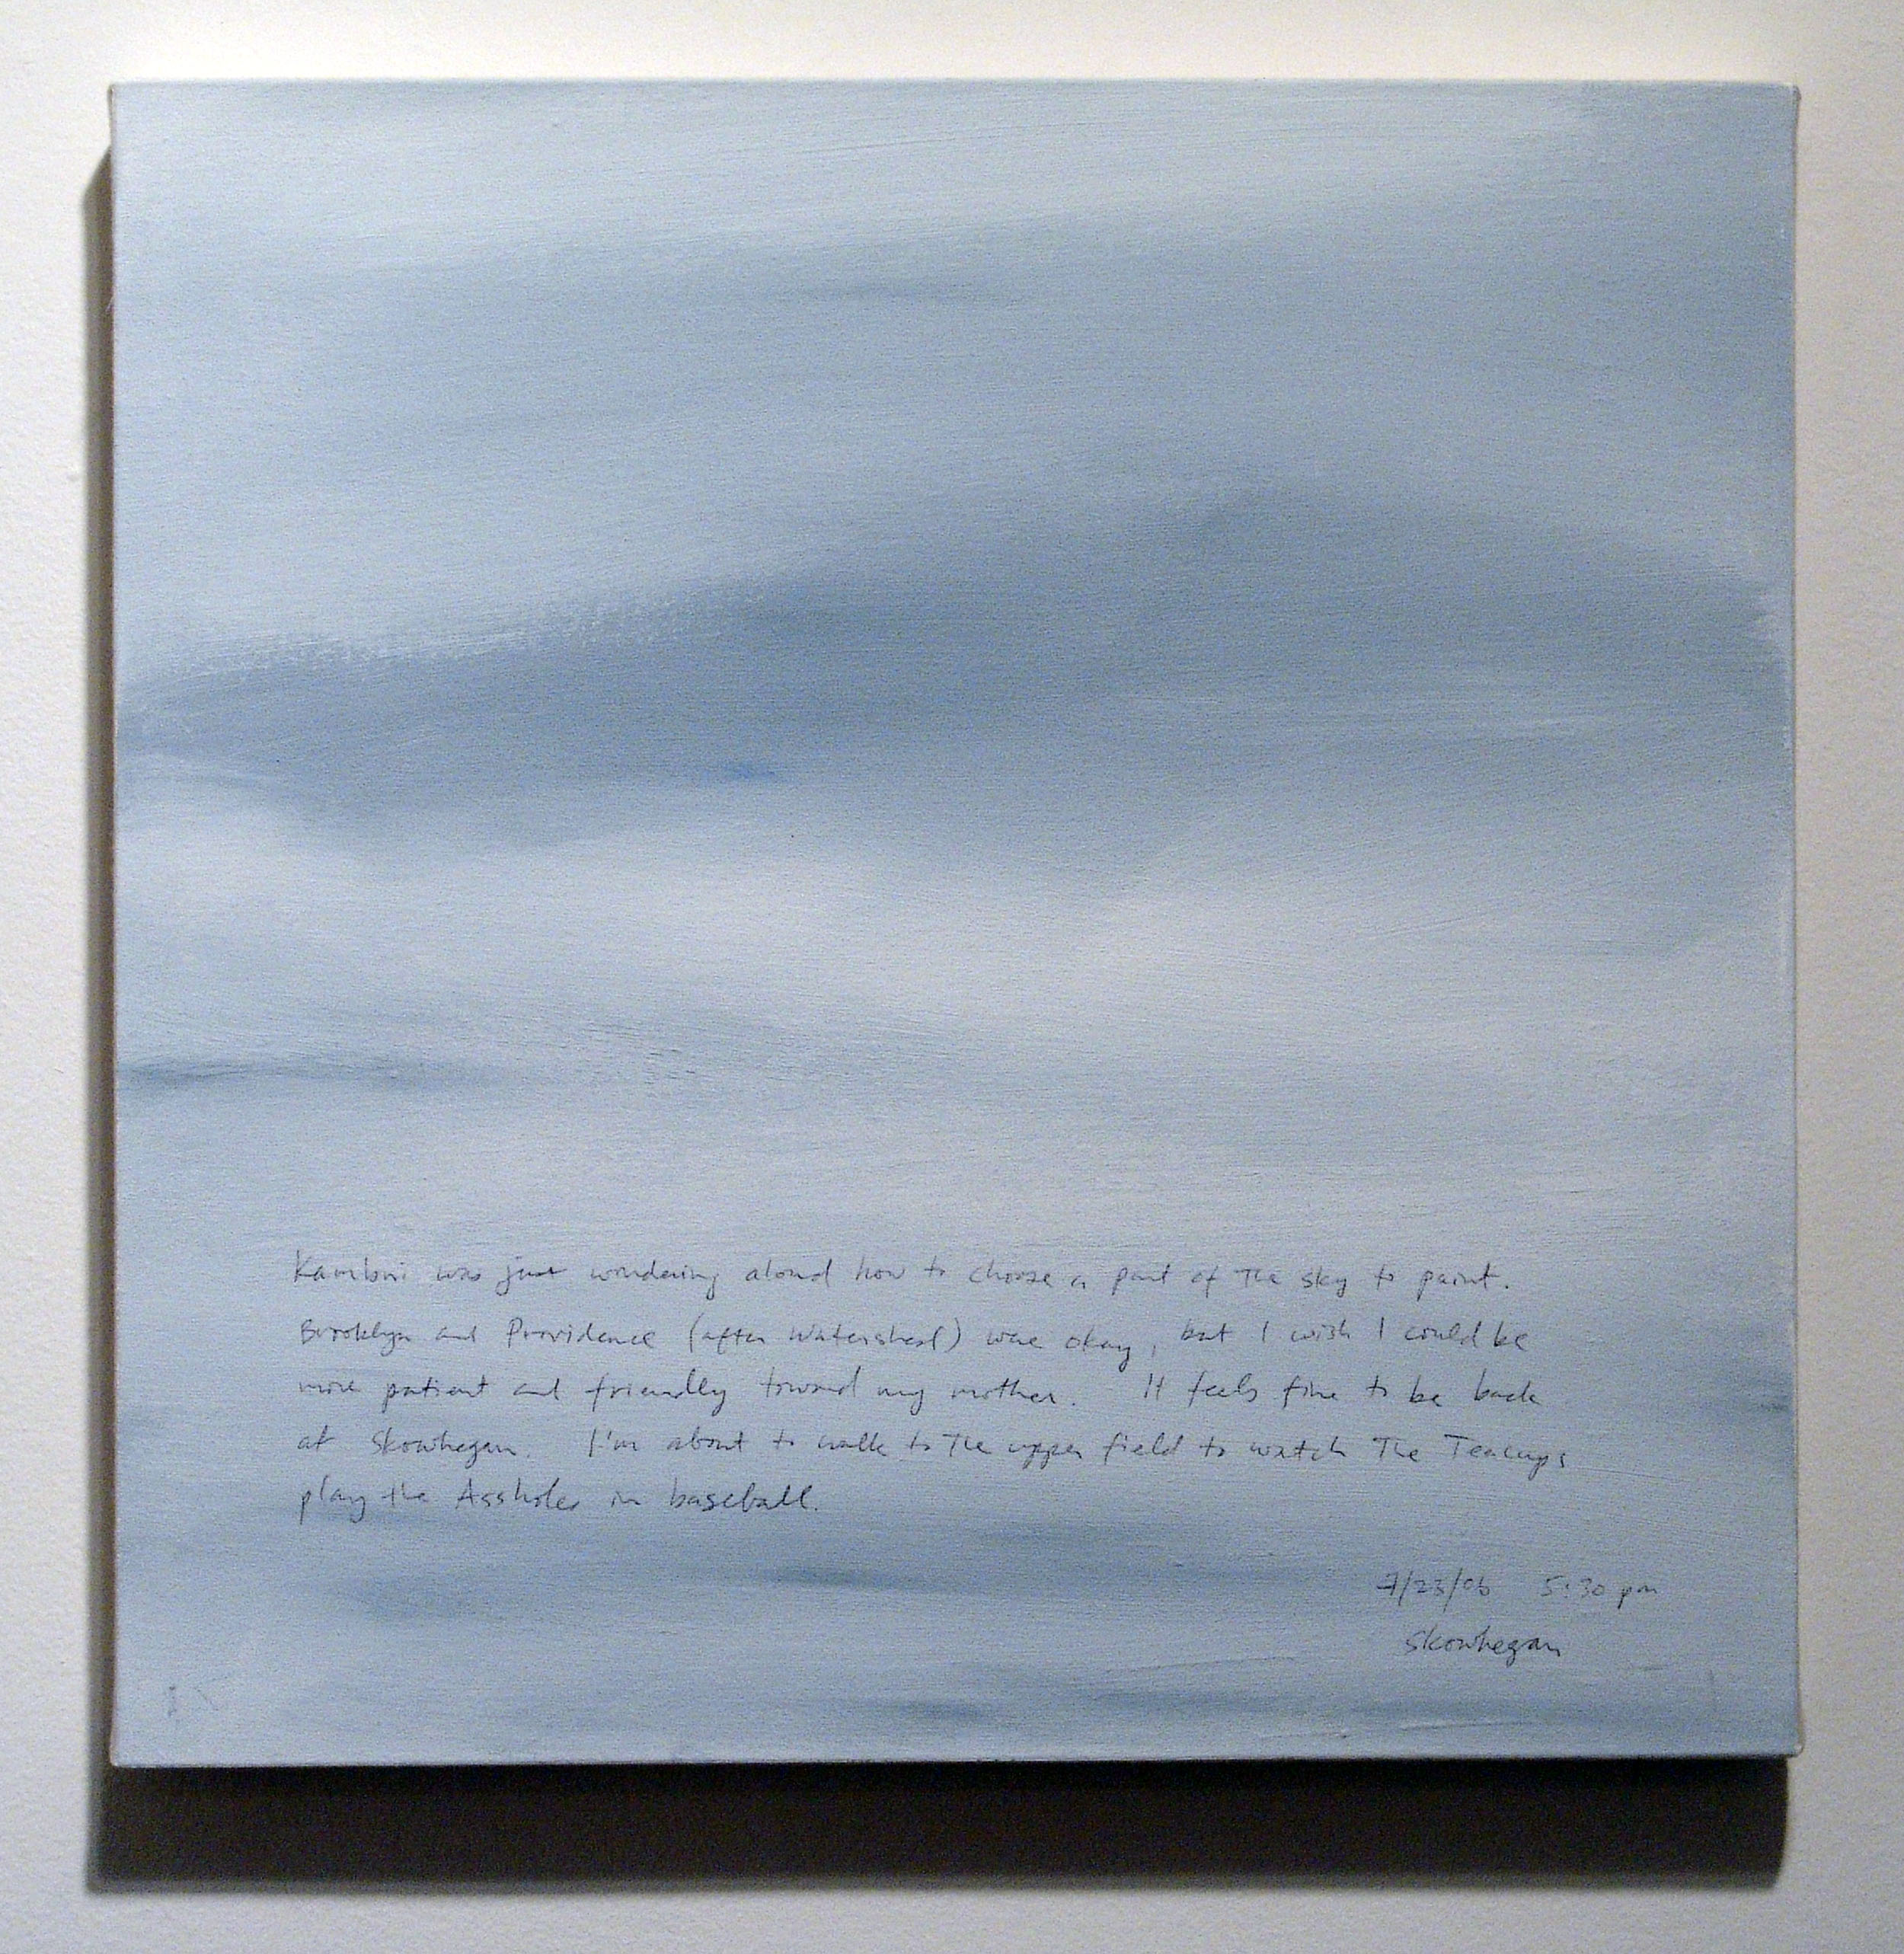 A 14 × 14 inch, acrylic painting of the sky. A journal entry is handwritten on the painting:

“Kambui was just wondering aloud how to choose a part of the sky to paint. Brooklyn and Providence (after Watershed) were okay, but I wish I could be more patient and friendly toward my mother. It feels fine to be back at Skowhegan. I’m about to walk to the upper field to watch the Teacups play the Assholes in baseball.

7/23/06 5:30 pm
Skowhegan”